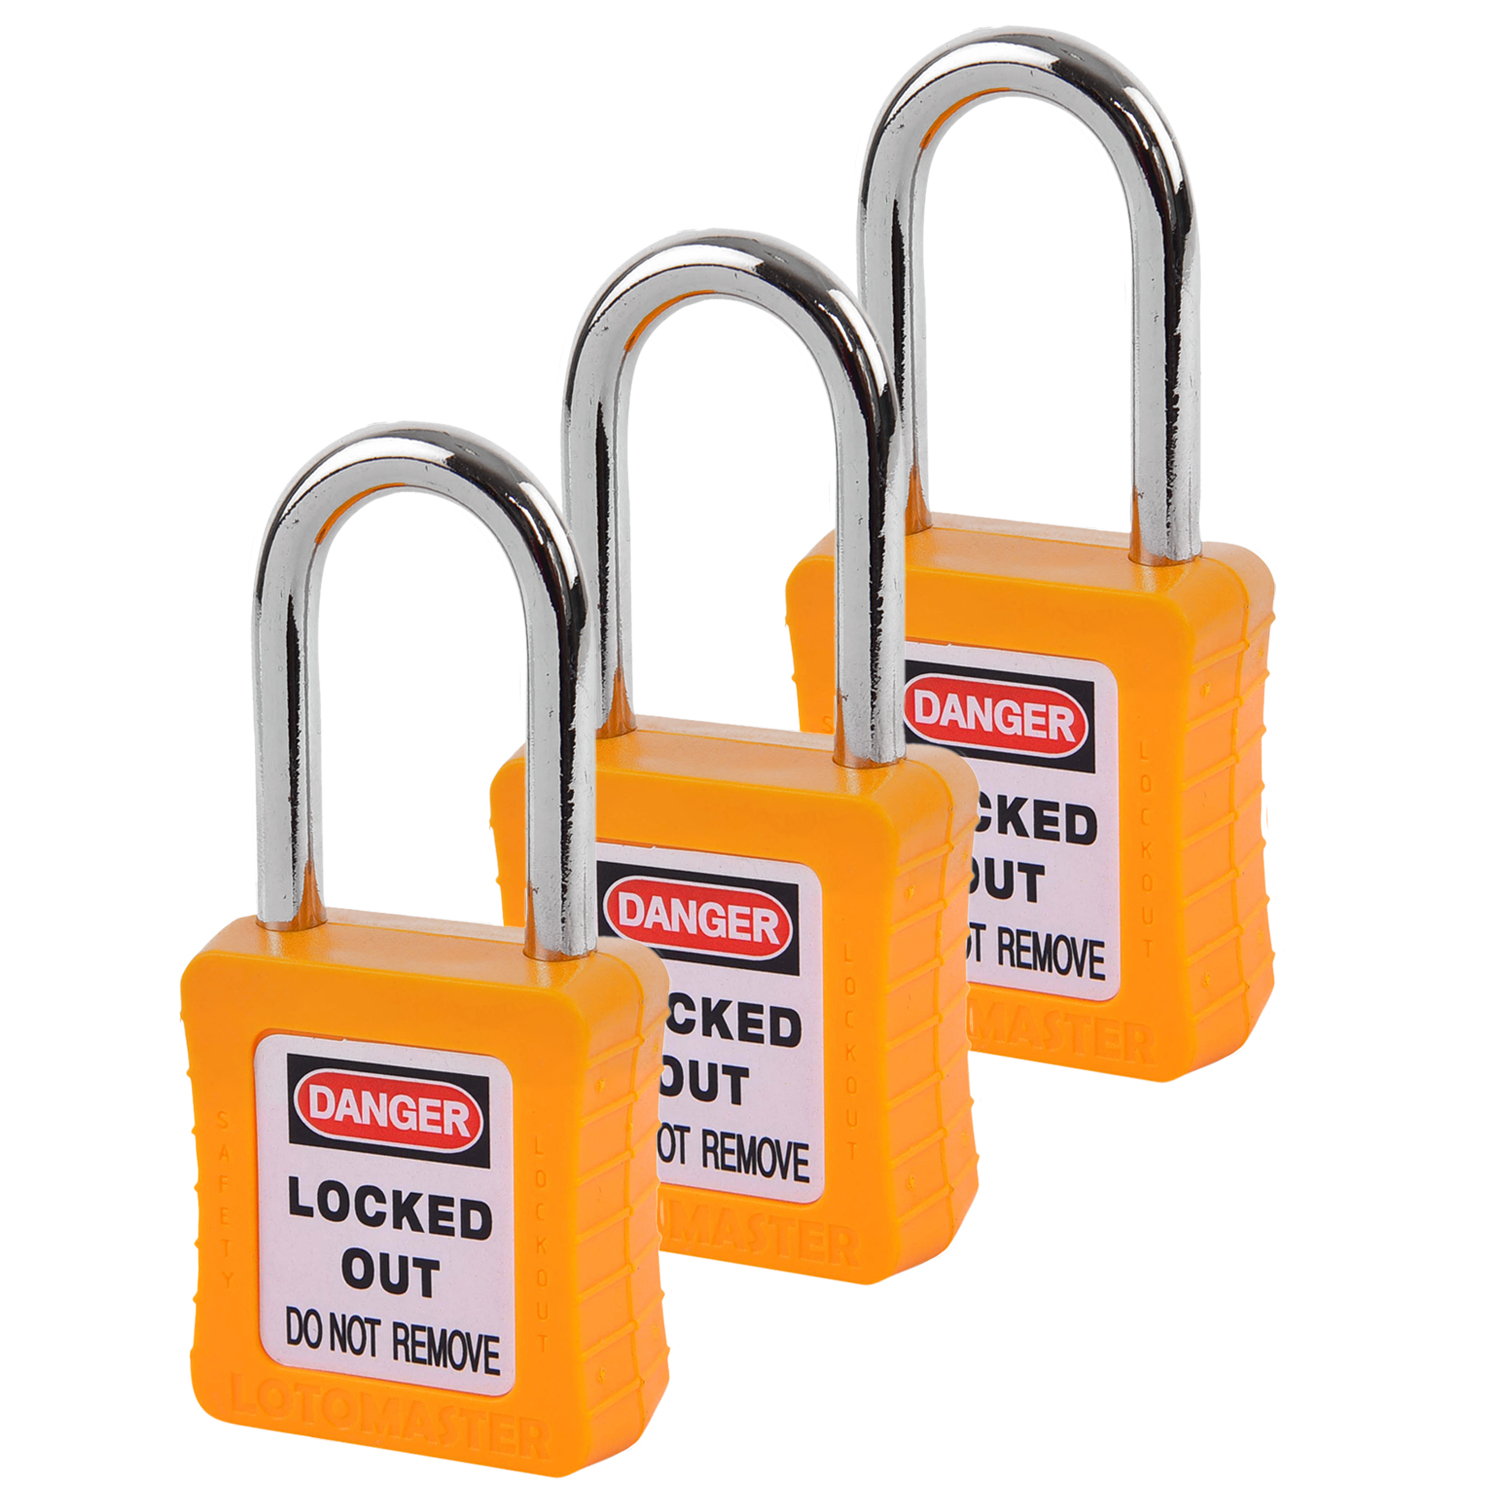 padlock with key and code